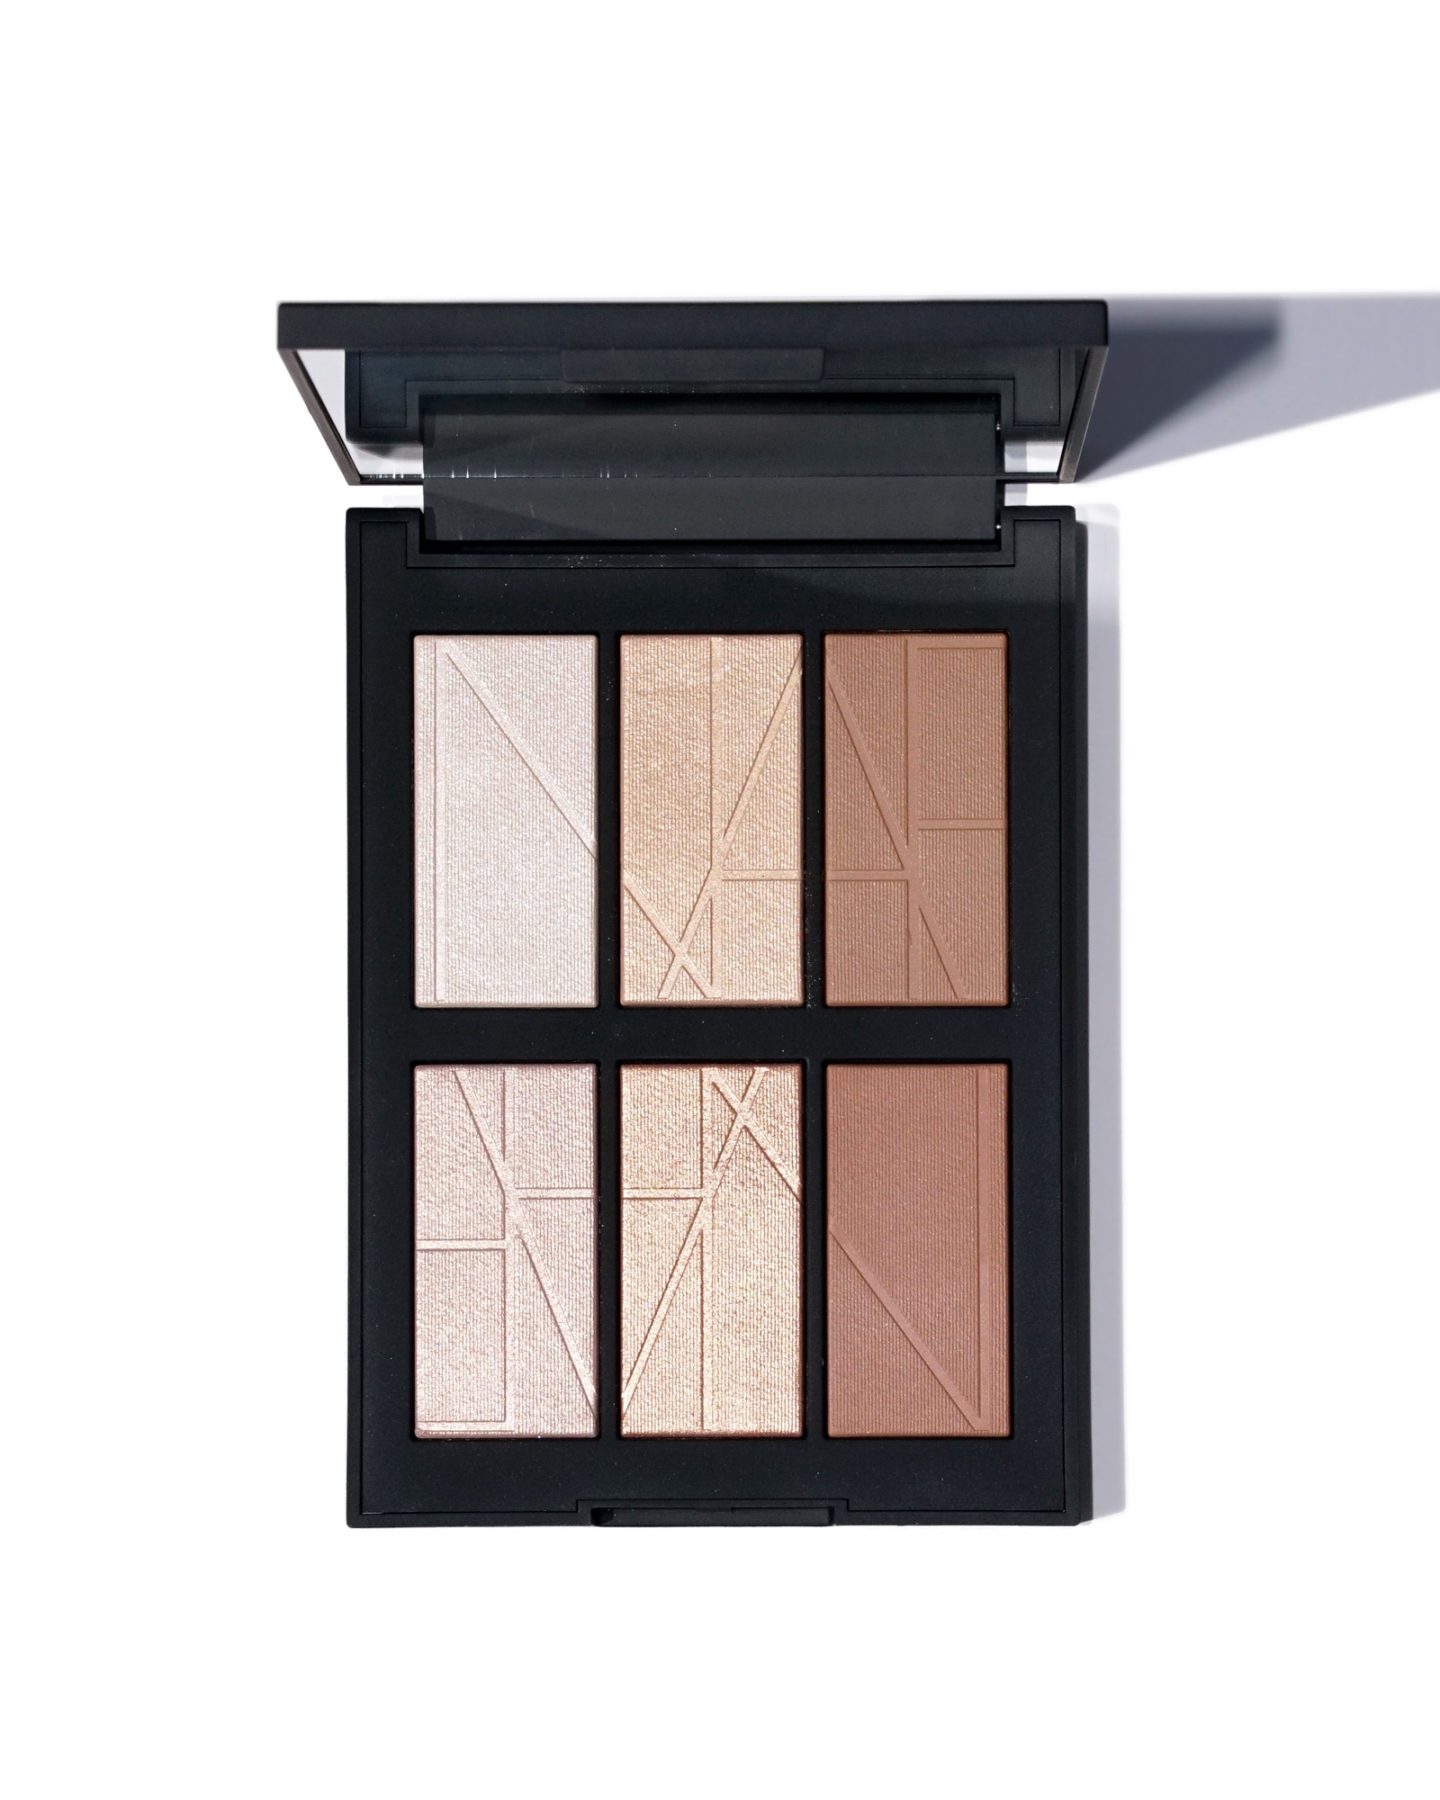 NARS Bord de Plage Highlighting and Bronzing Palette Review | The Beauty Look Book